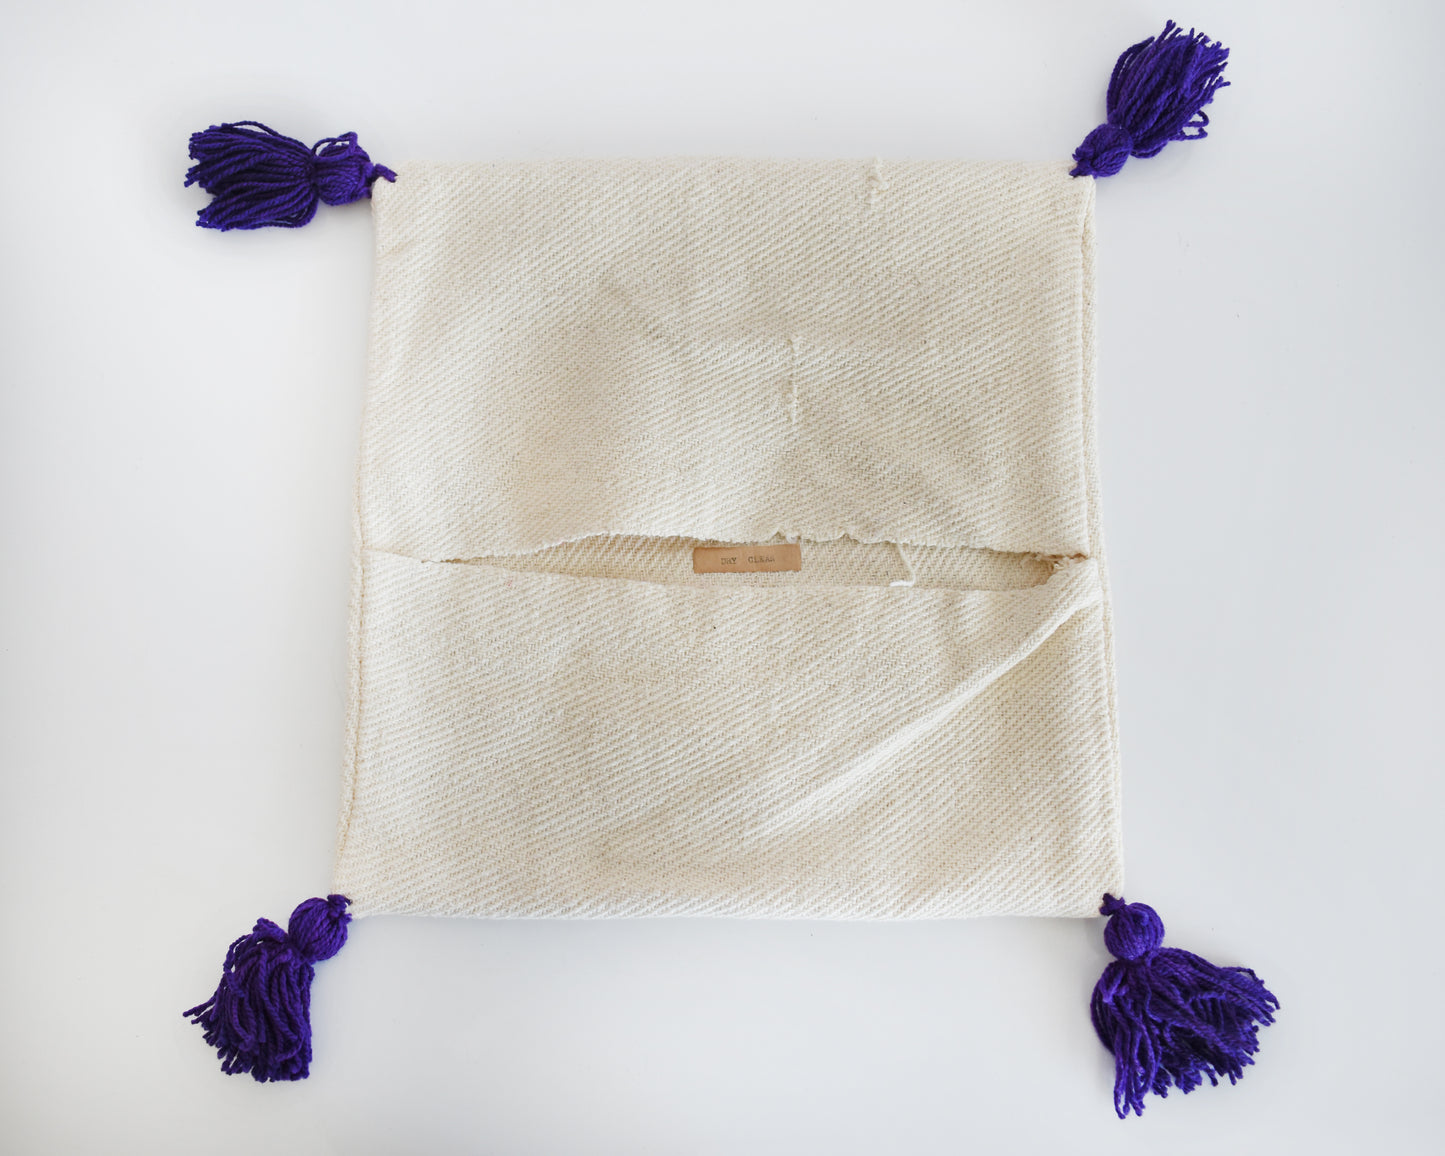 The back of a purple tassel pillow cover showing the opening.